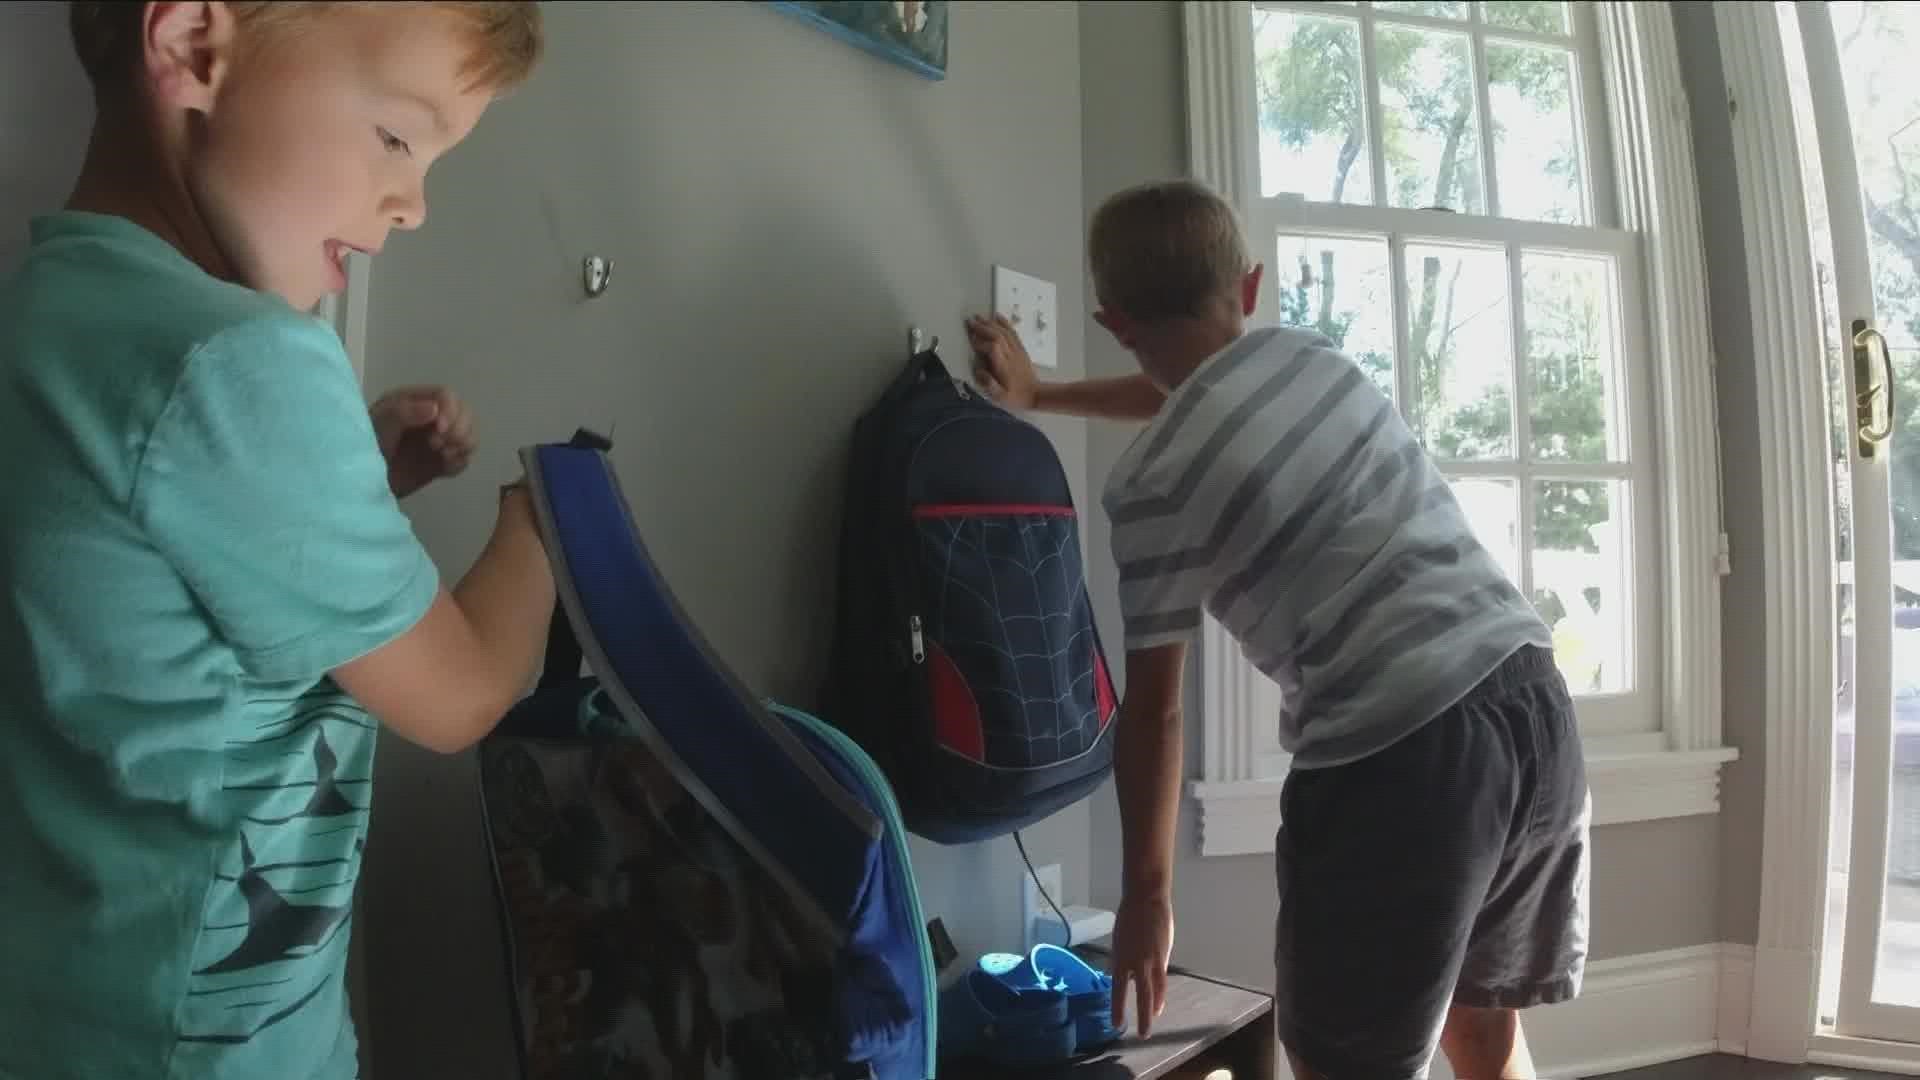 From a paper sorting system to folding clothes, the owner of home organizing company Simplify Buffalo offers advice to get ready for Back 2 School.